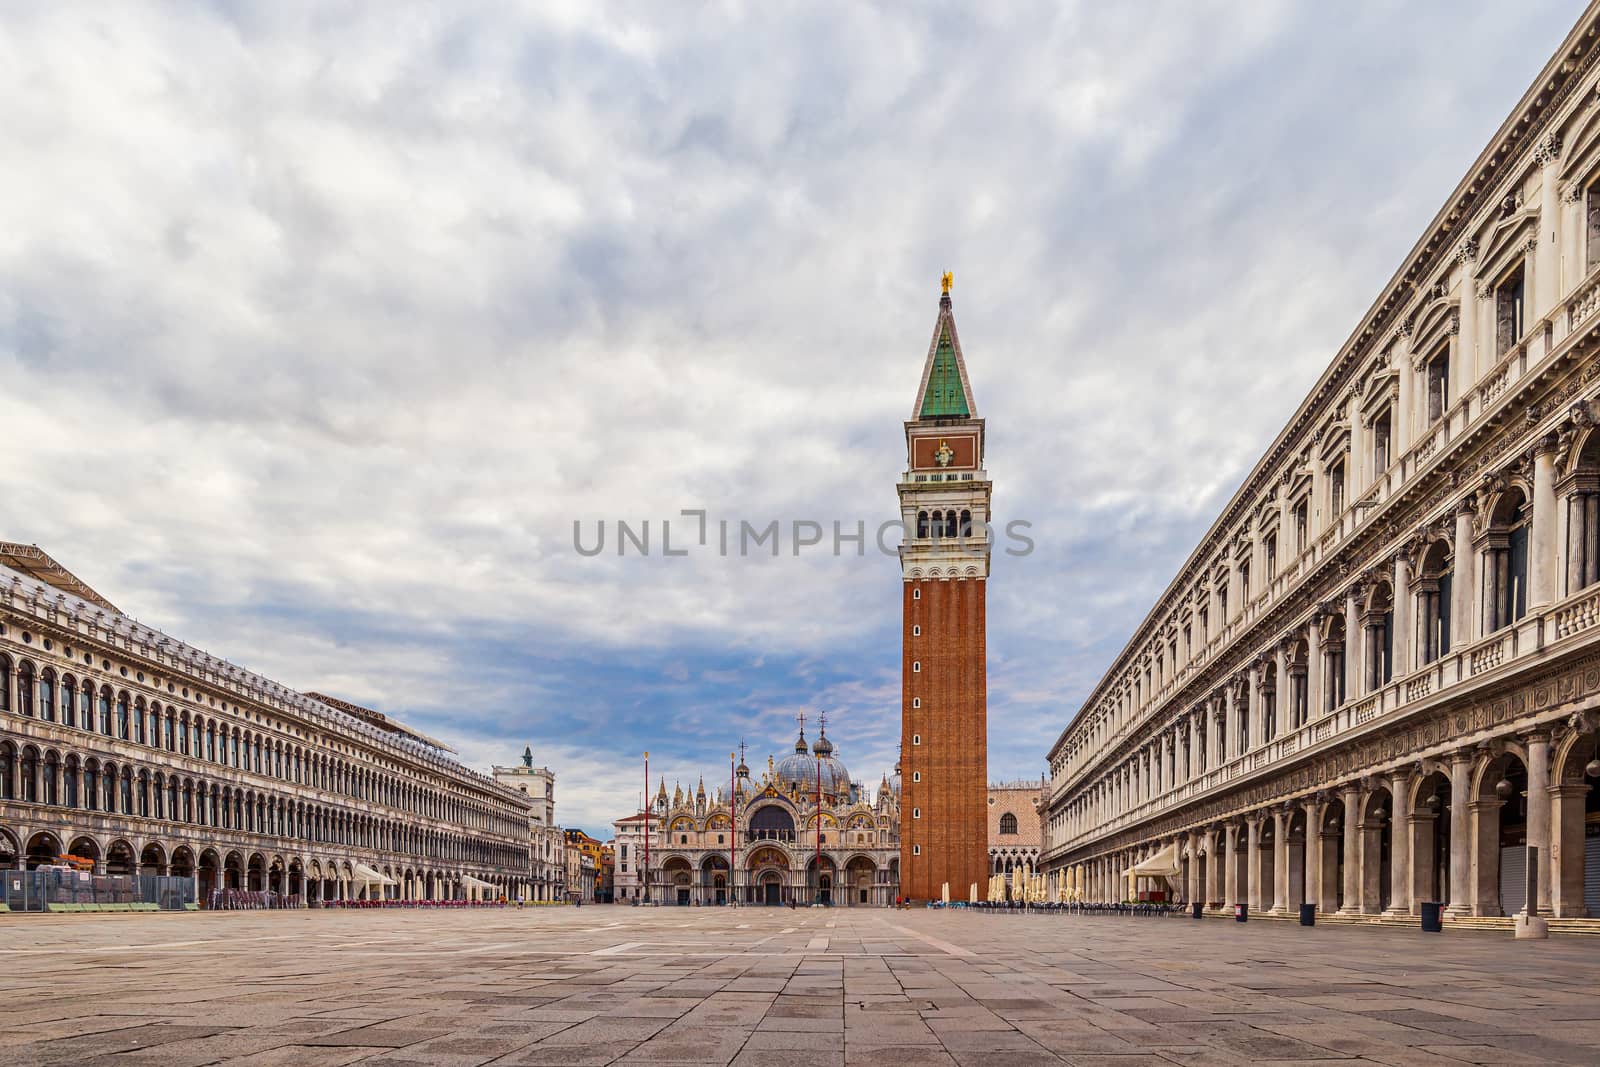 San Marco square with Campanile and Saint Mark's Basilica in Venice, Italy by COffe